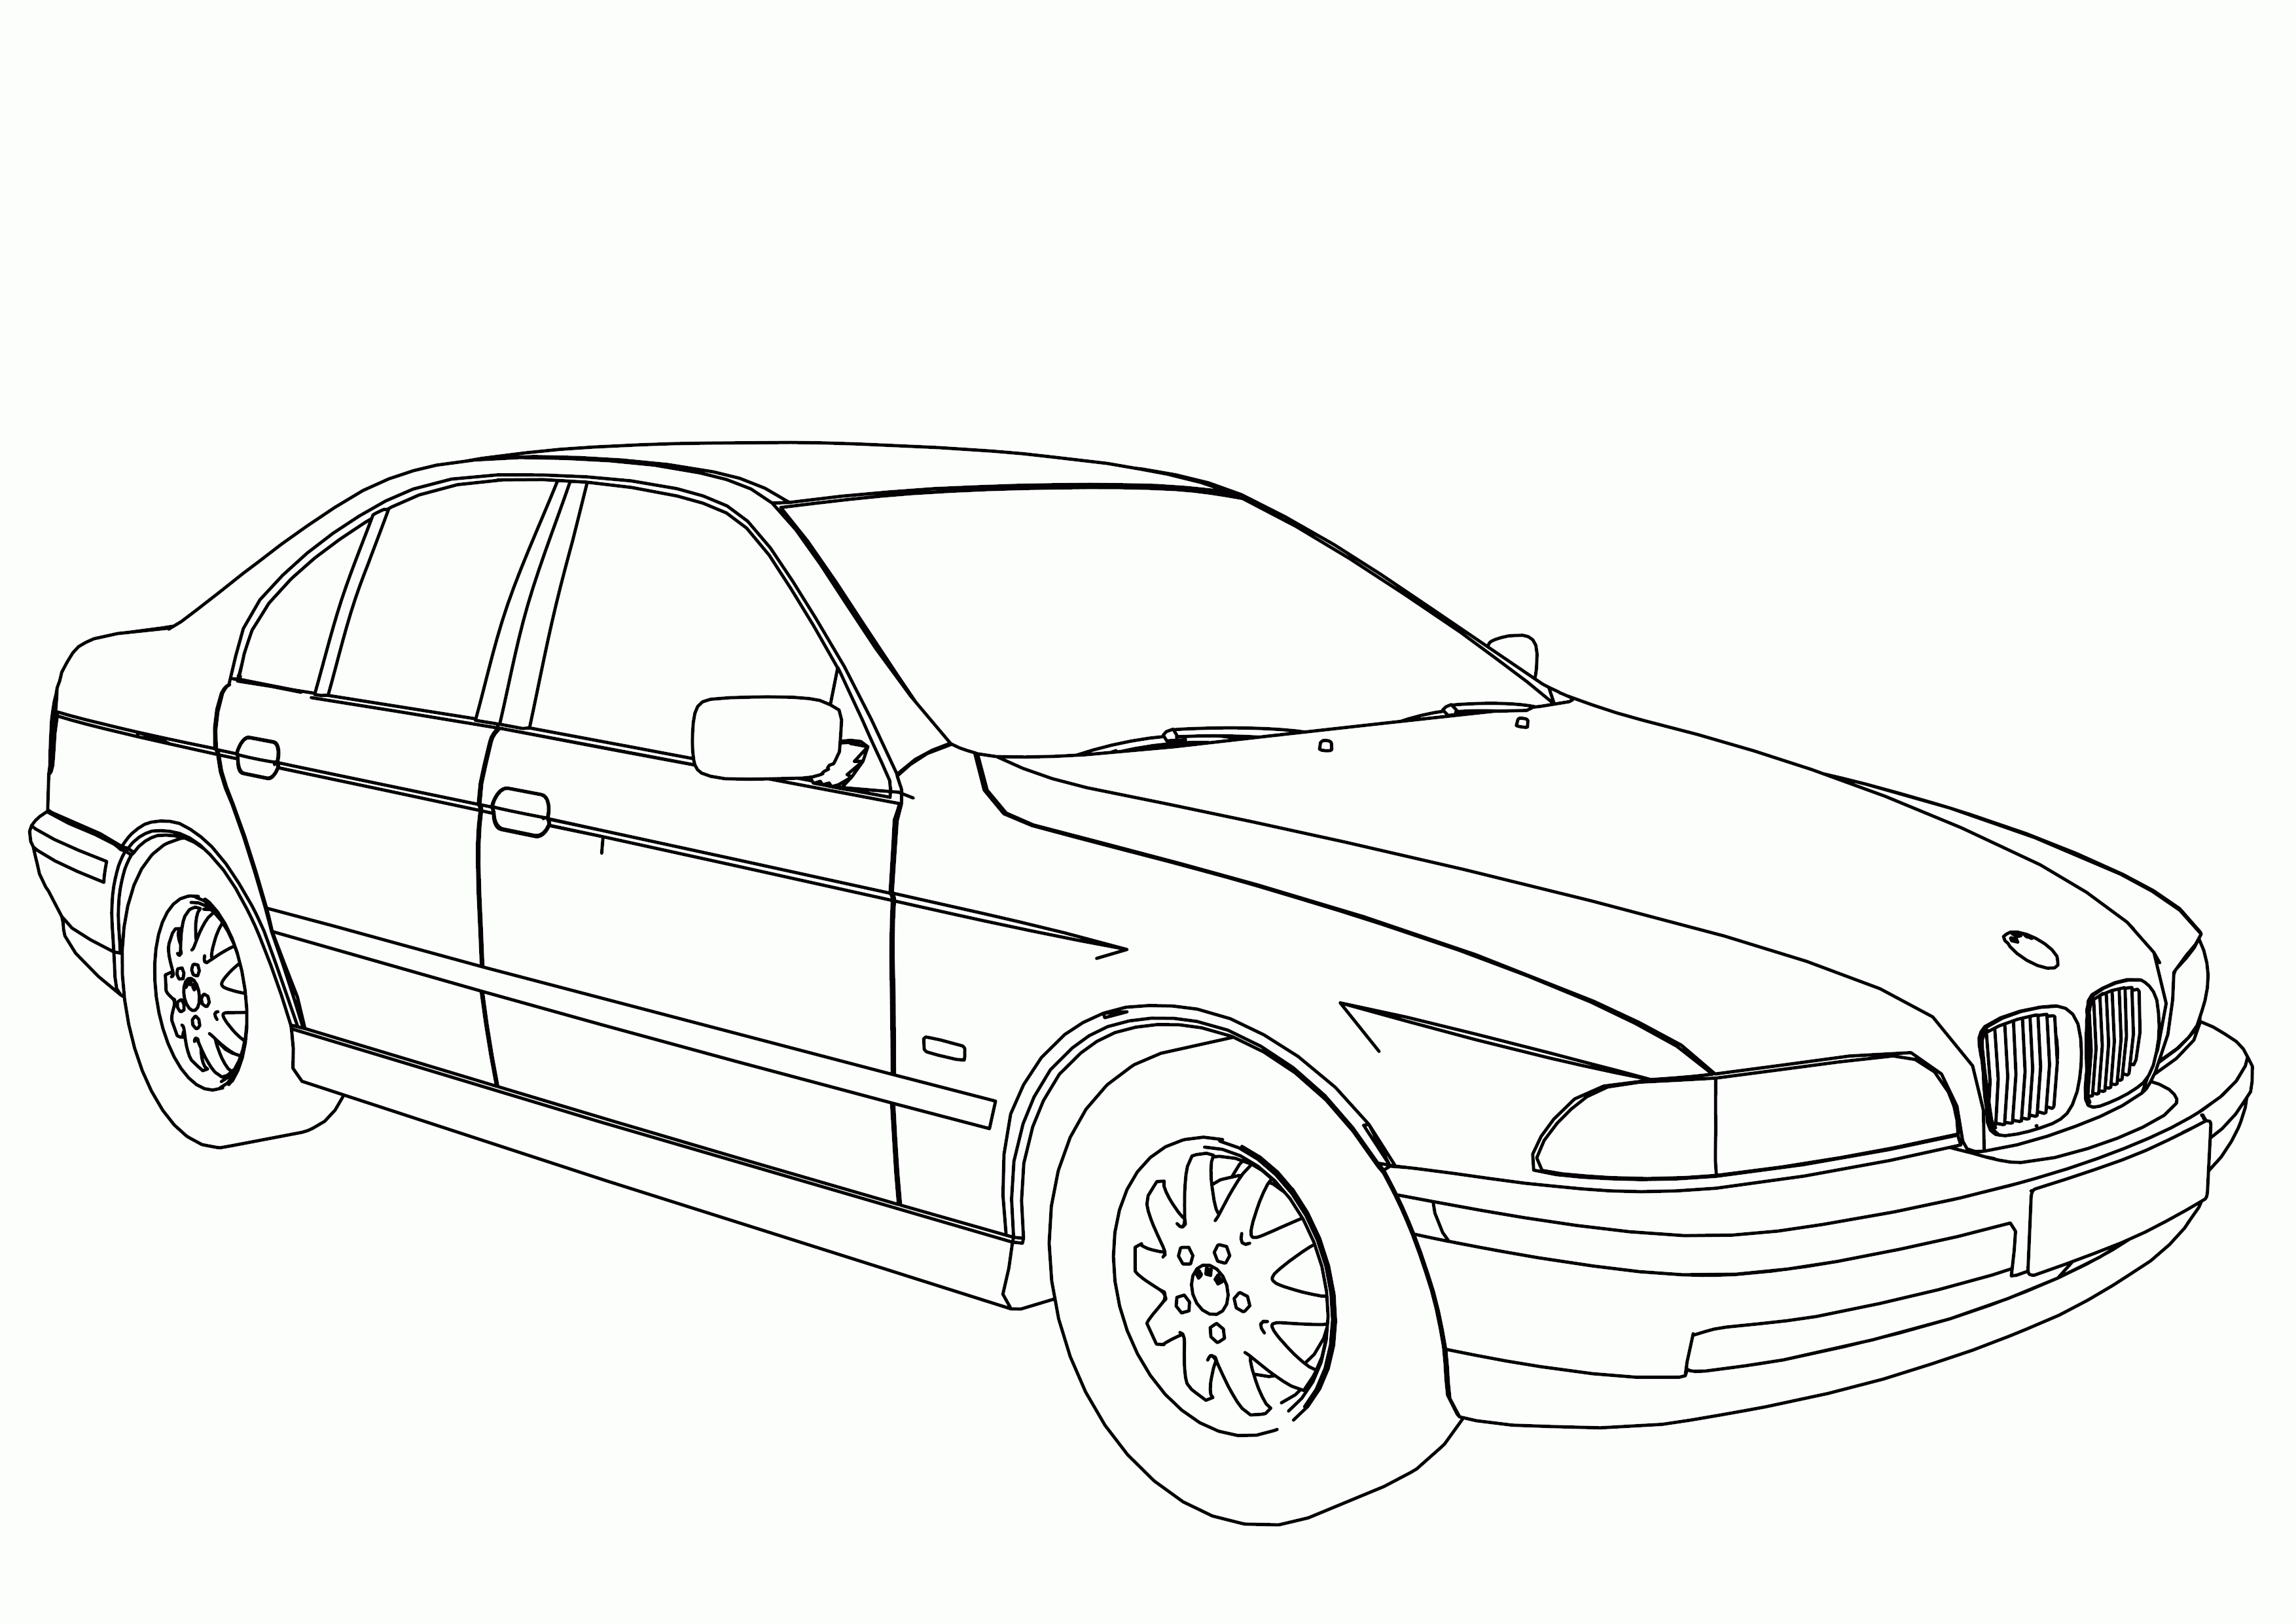 Bmw 540 Model Car Coloring Page | Wecoloringpage